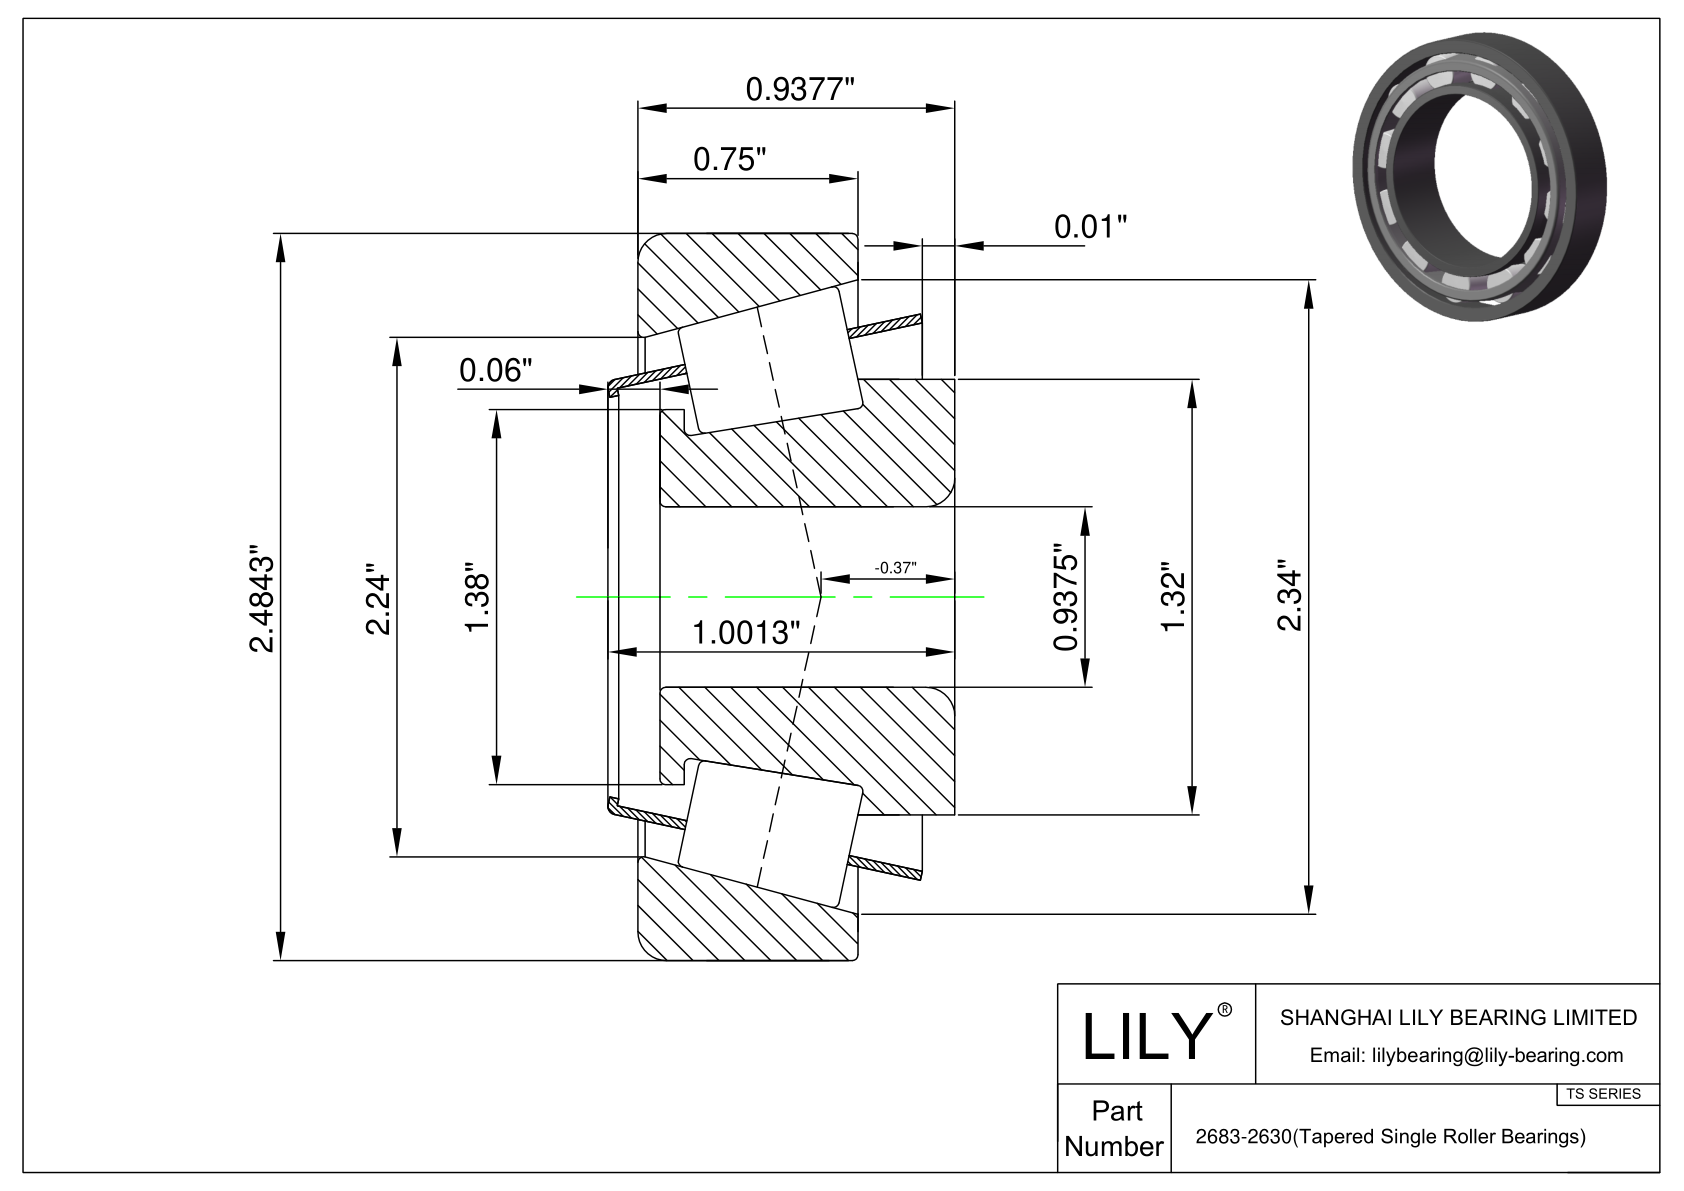 2683-2630 TS (Tapered Single Roller Bearings) (Imperial) cad drawing